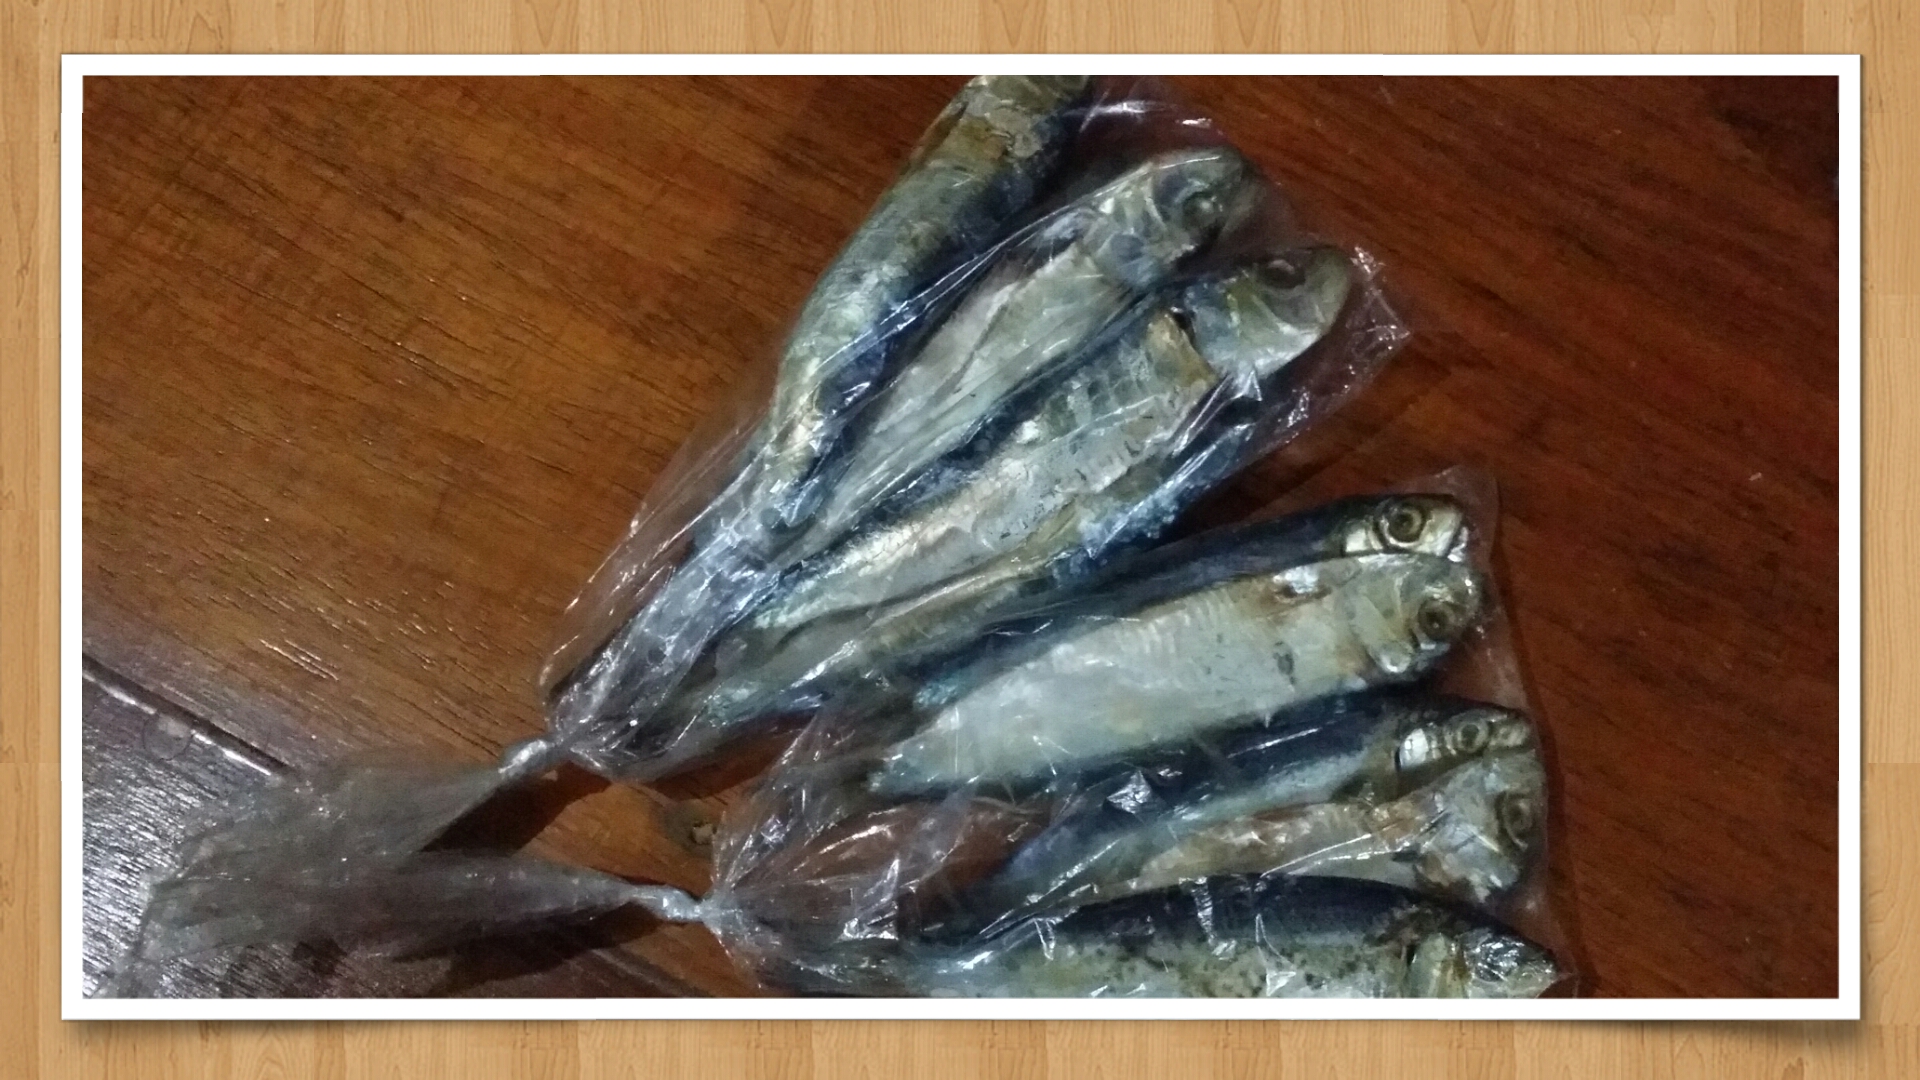 the dried fish